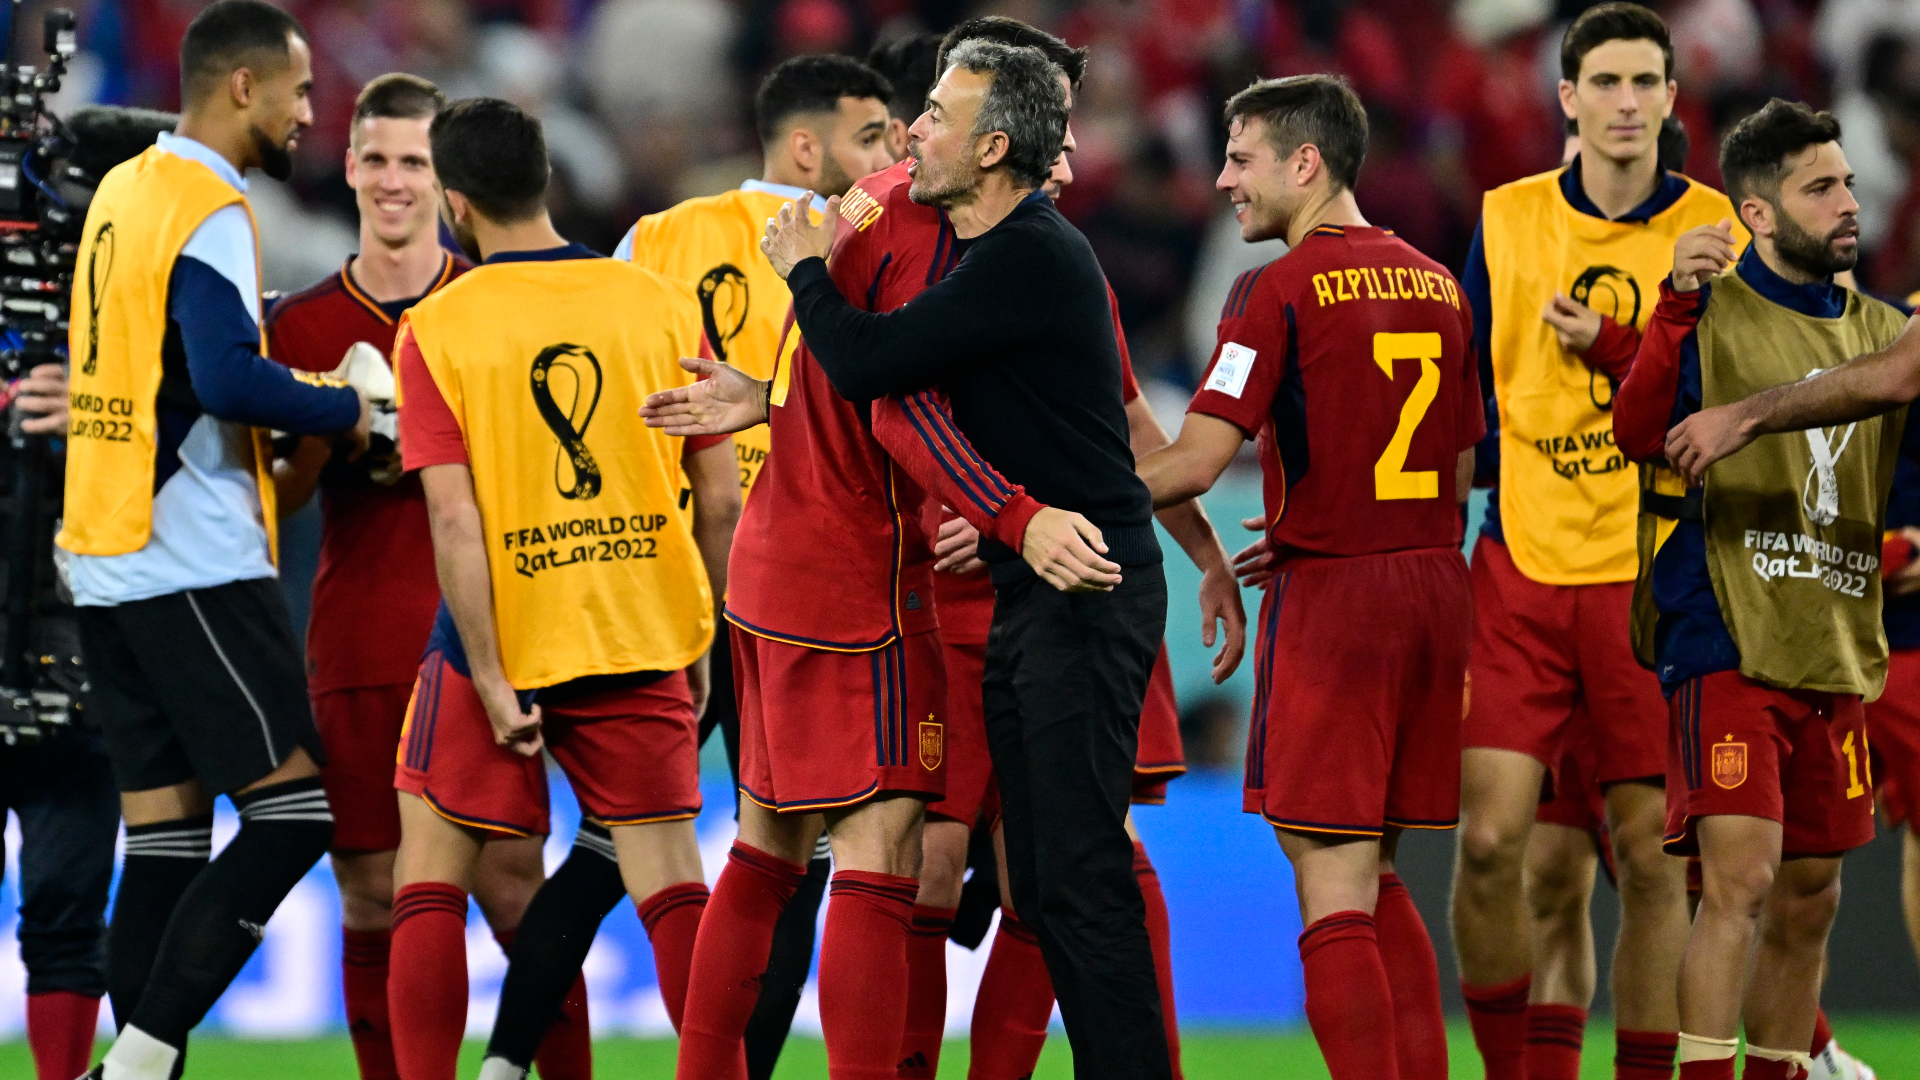 Spain thrashes Costa Rica 7-0 in World Cup opening match